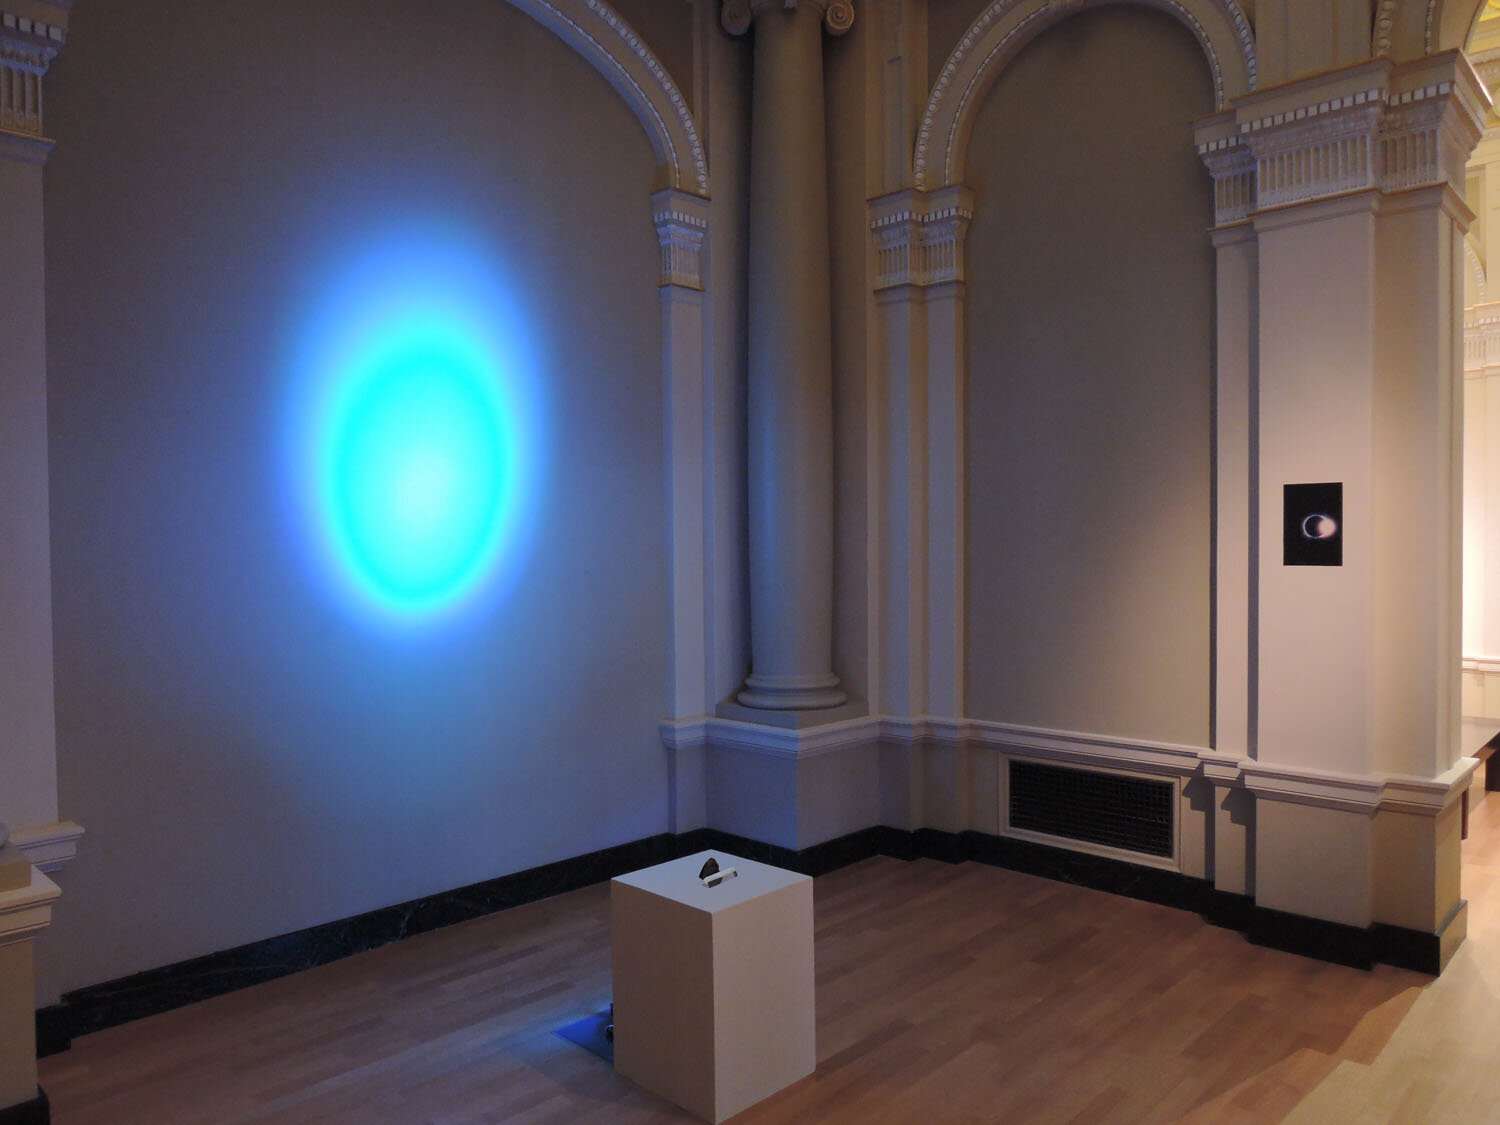   A Question of Sight , installation view, 2014, LED strobe projection, glazed ceramic, glass prism, gold chain, MDF, latex paint, acrylic, chromogenic print, 116 x 172 x 120 inches 